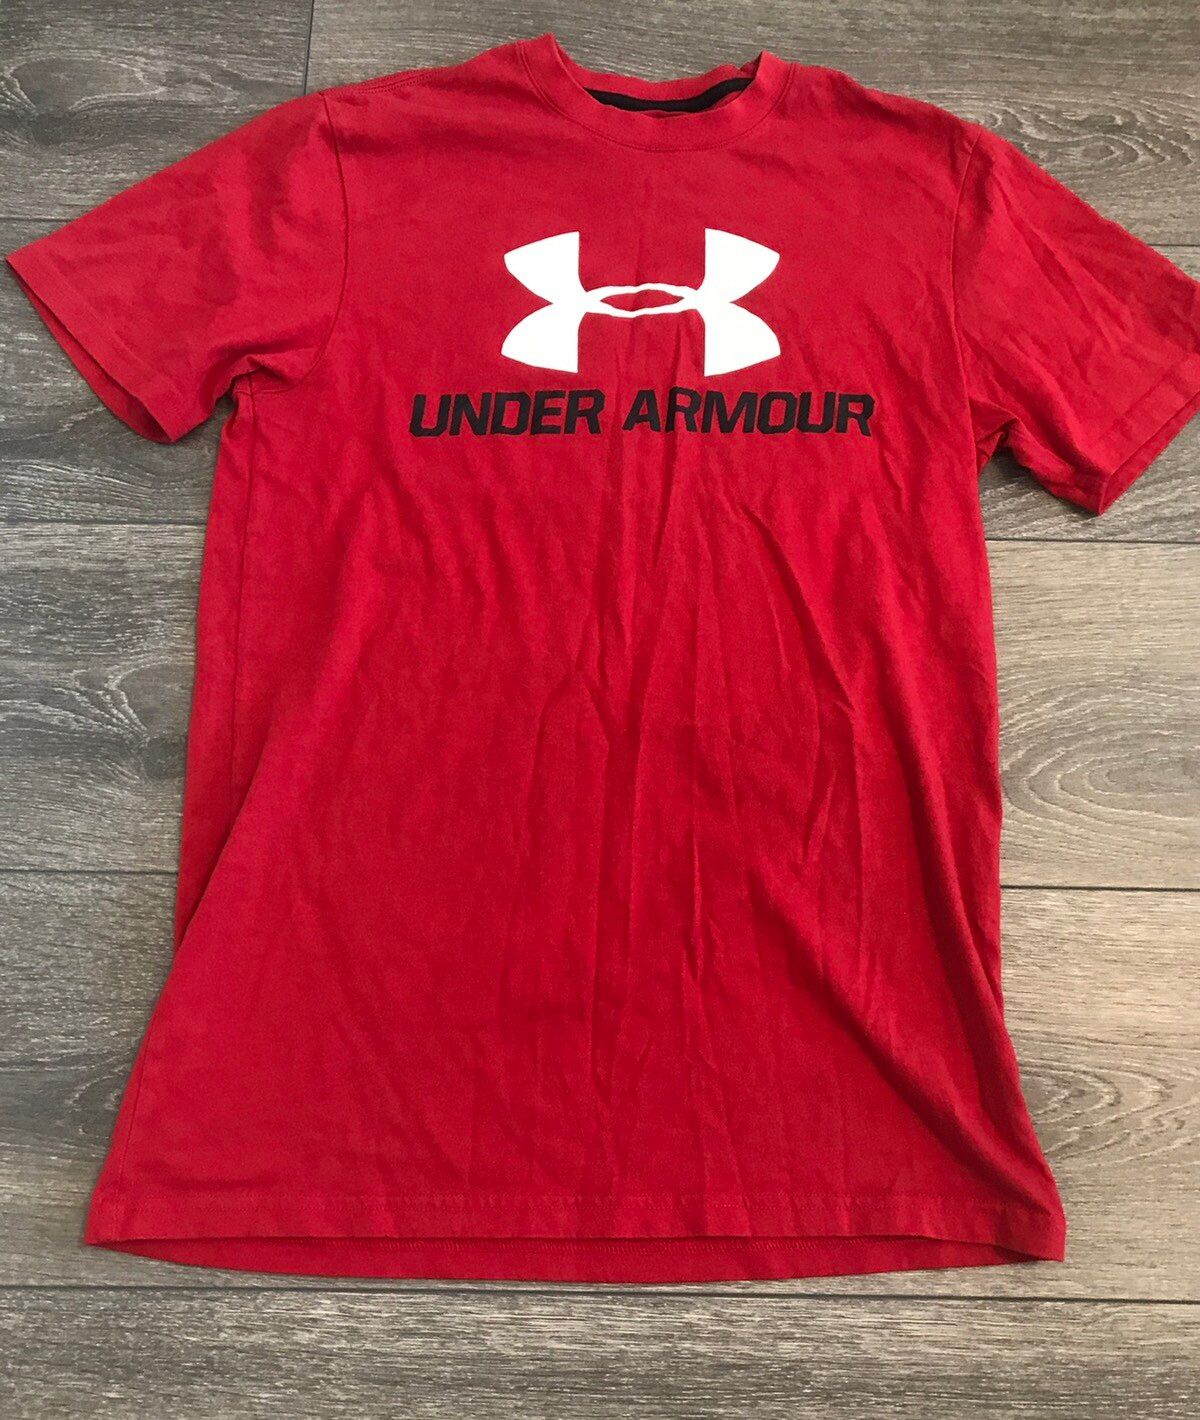 Under Armour Under Armour Shirt Mens Extra Large Gray White Plaid